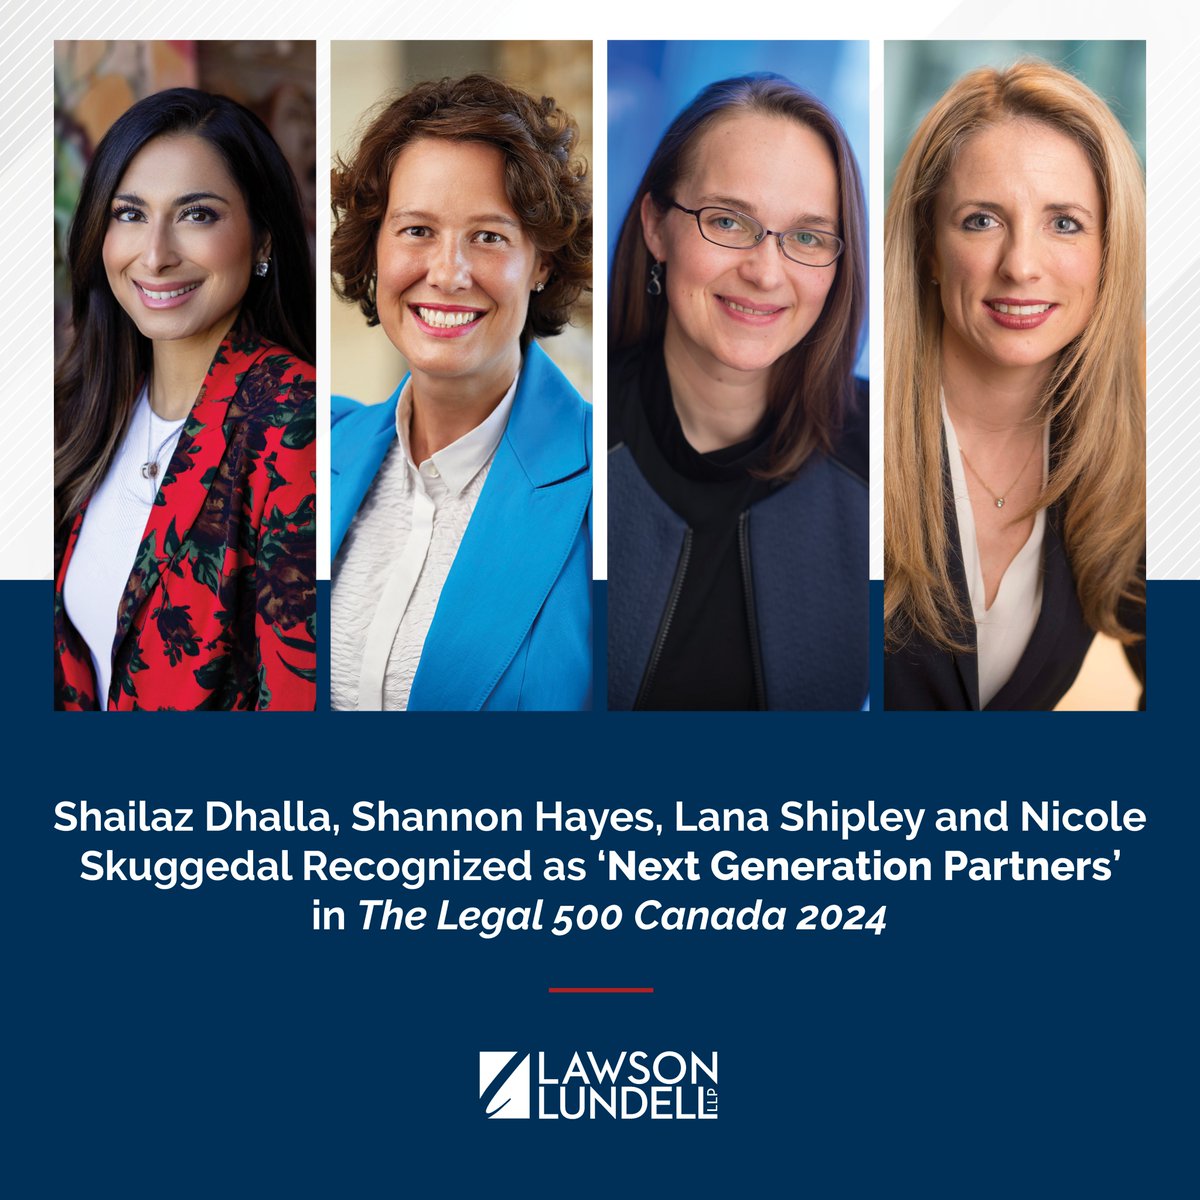 We are pleased to announce that four of our lawyers have been recognized as ‘Next Generation Partners’ by @thelegal500 for 2024. Learn more here: lawsonlundell.com/newsroom-news-…